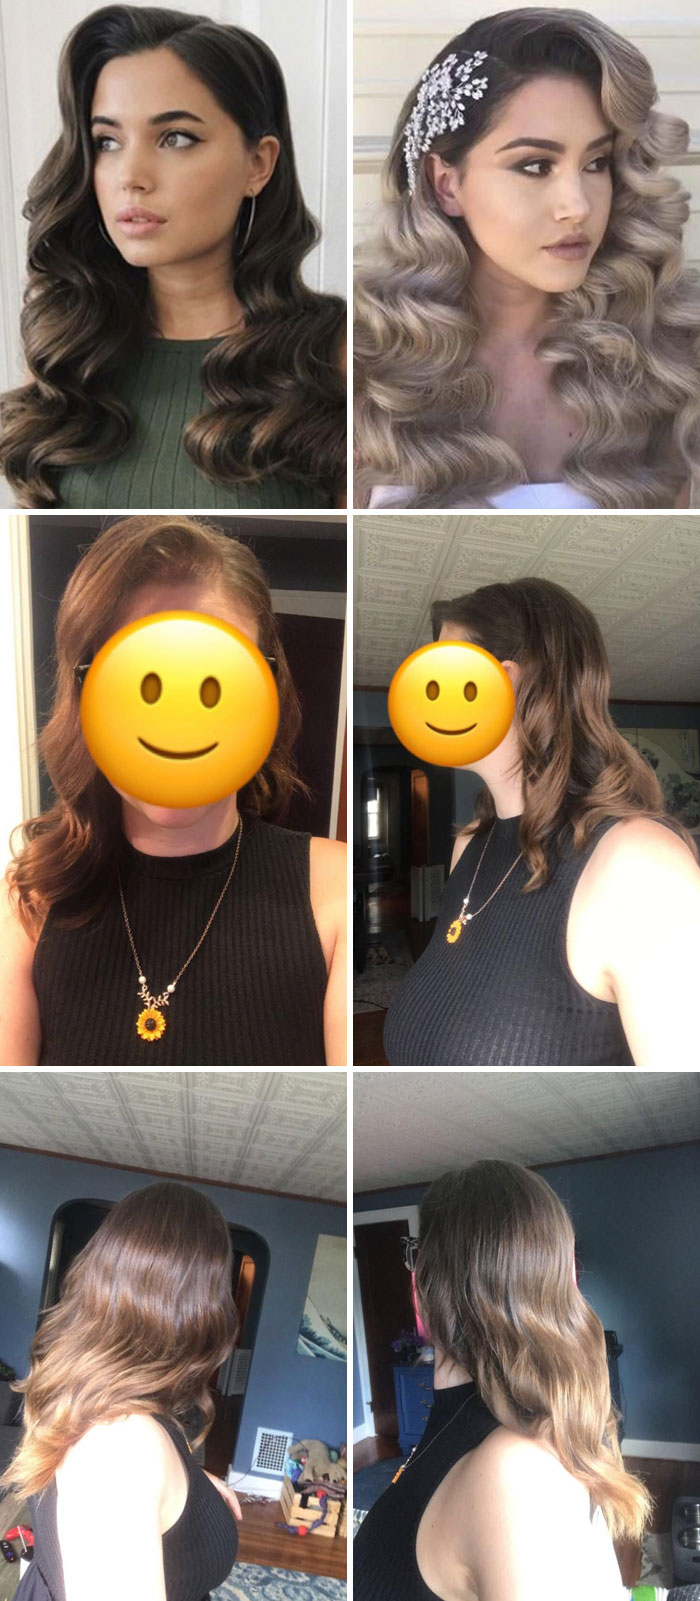 Am I Wrong For Being Very Dissatisfied With My 2nd Hair Trial? Pics At The Top Are What I Asked For. This Was $100 Including The Tip